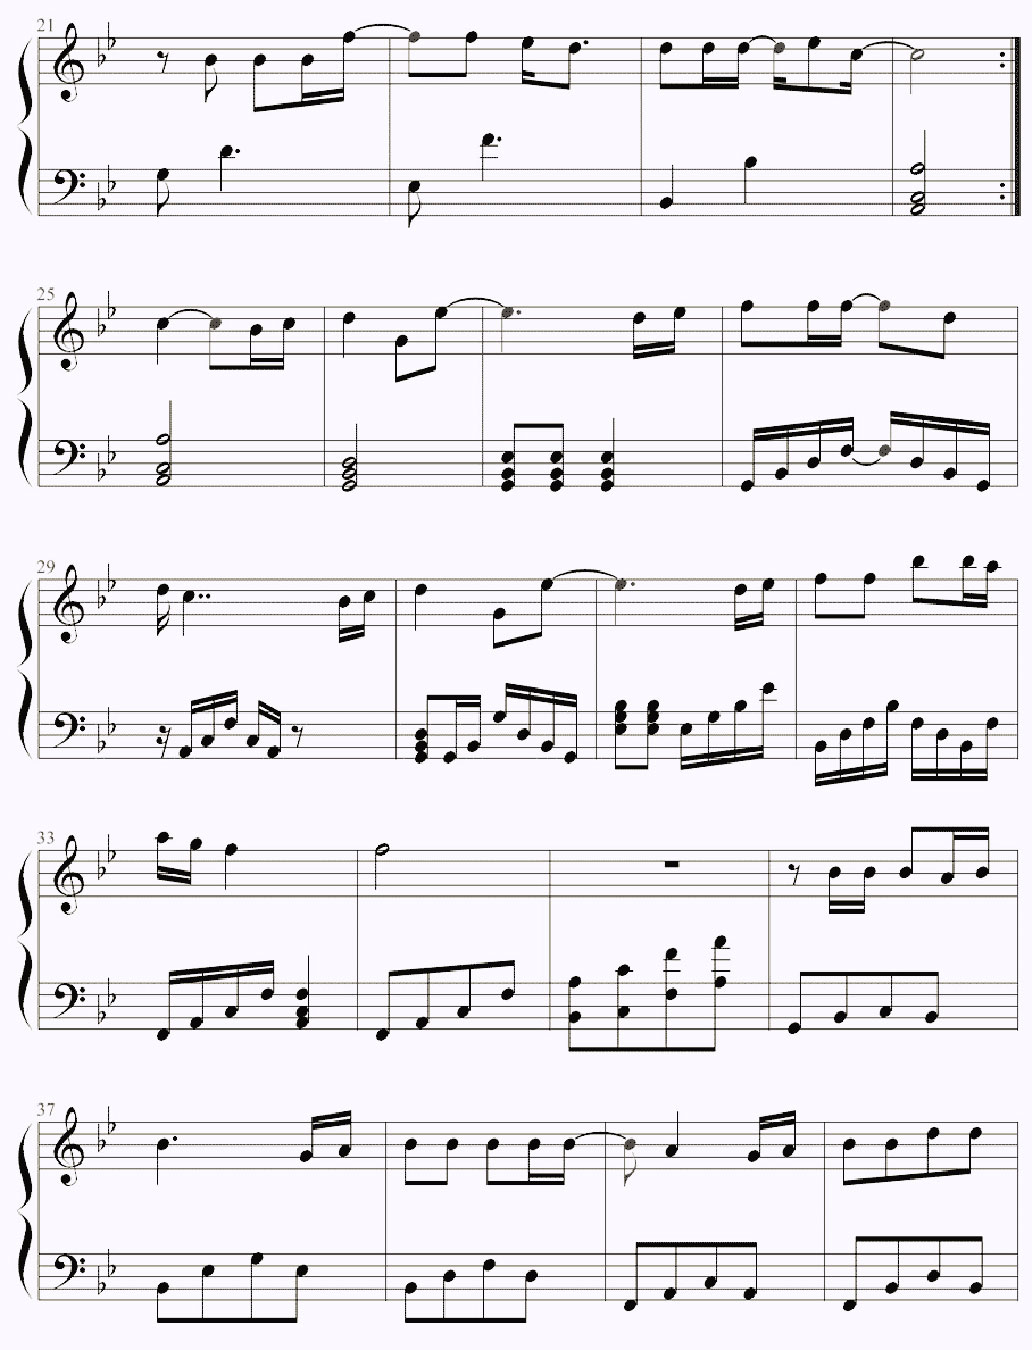 suddenly piano sheet music notes